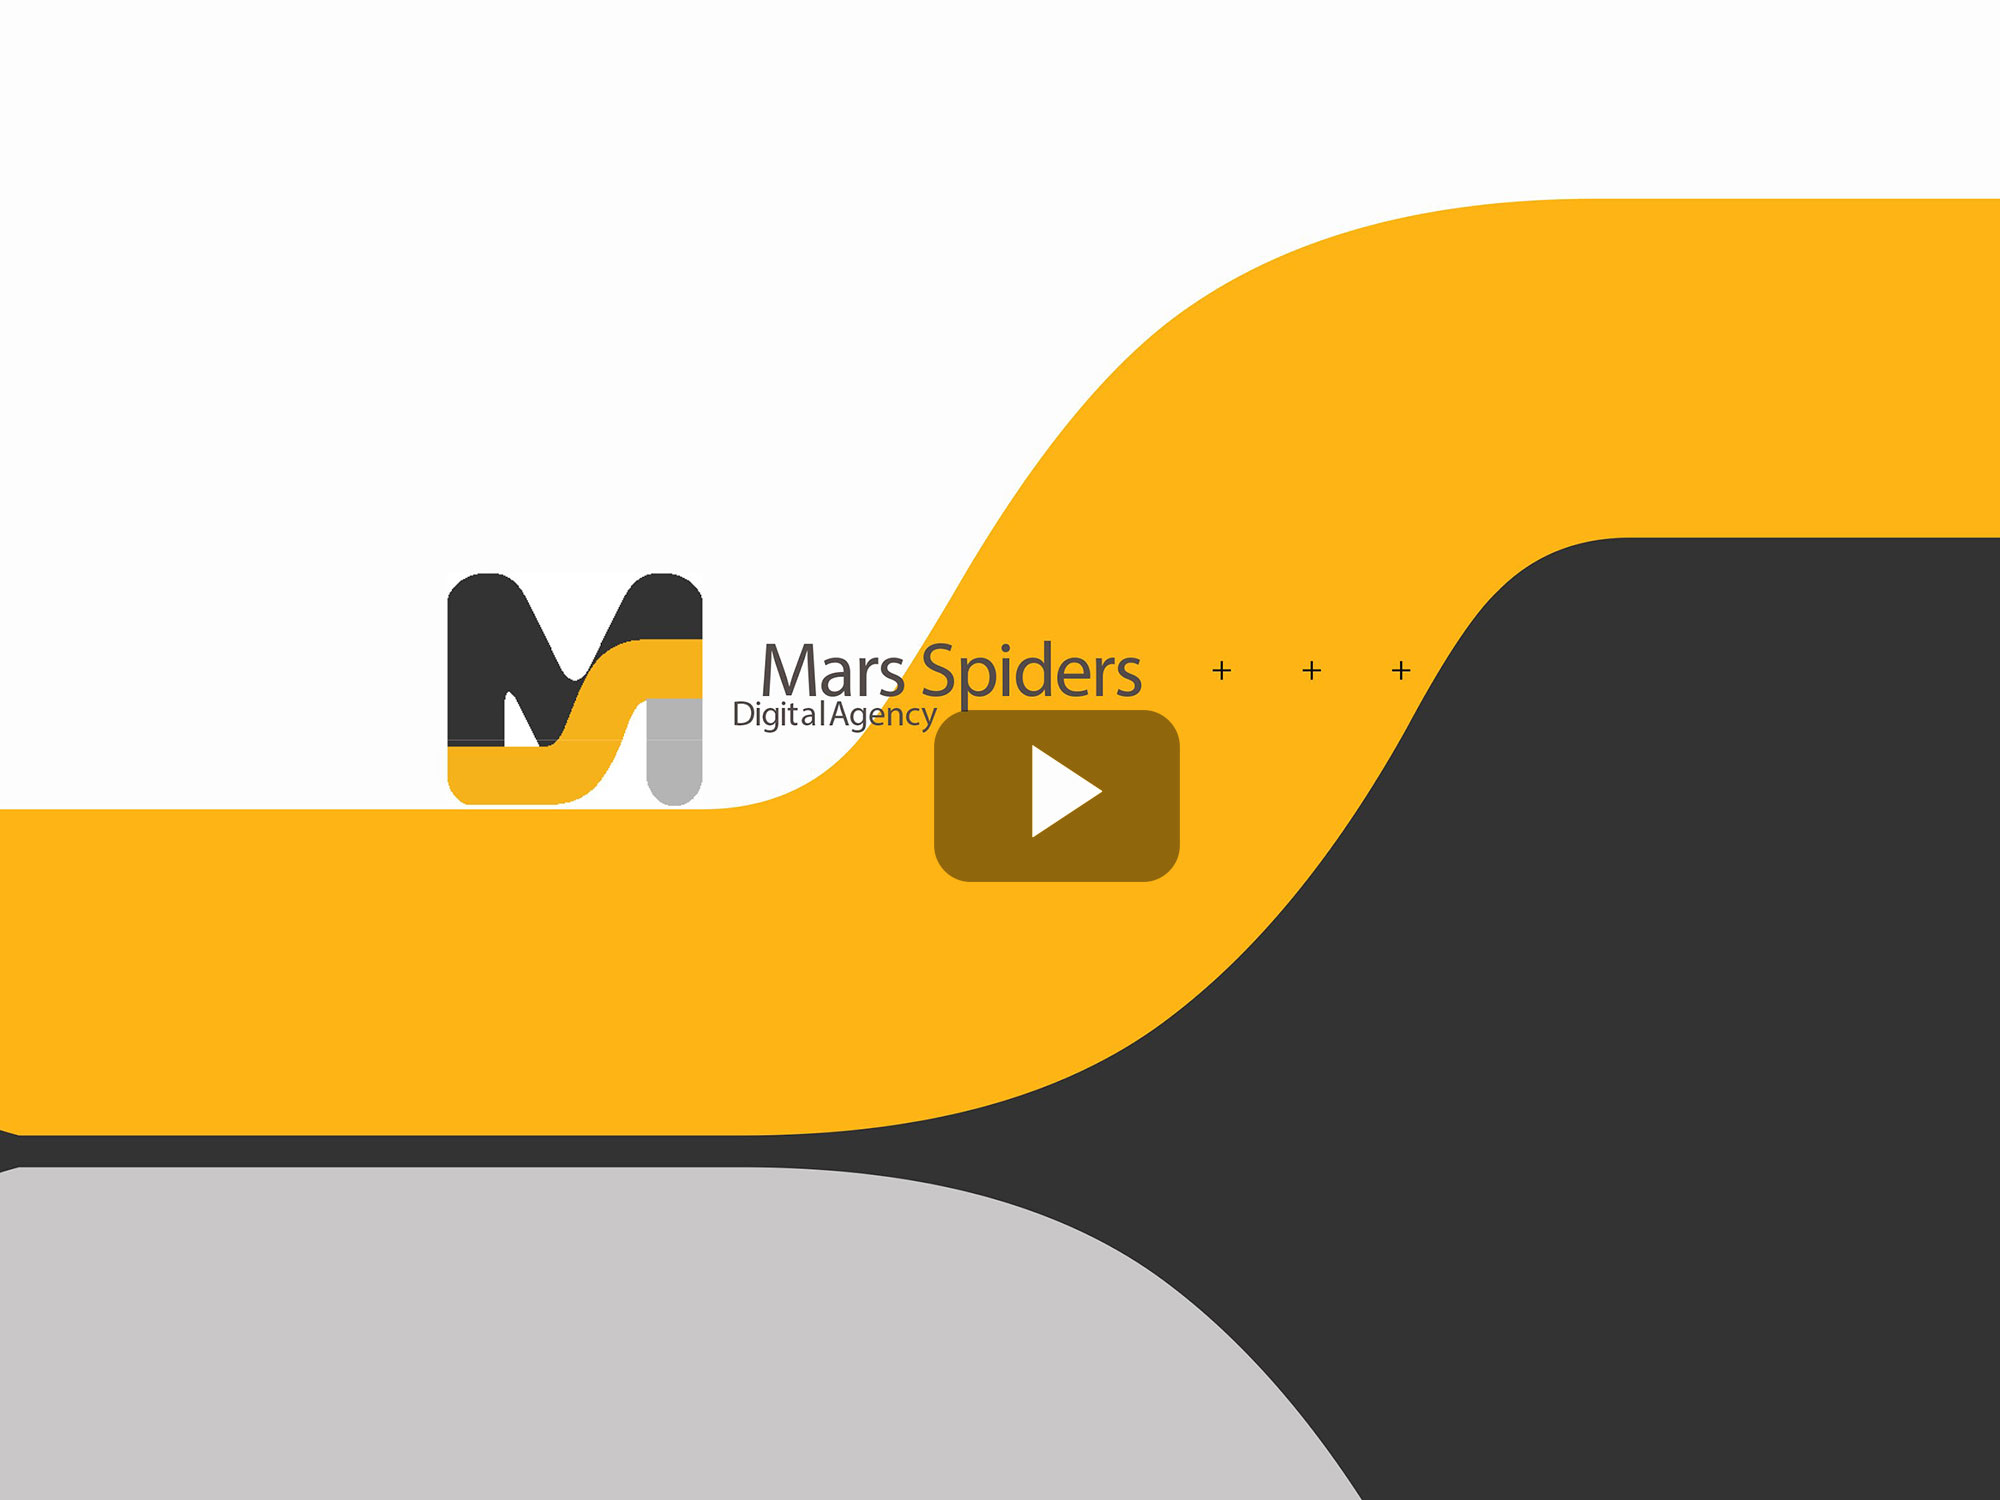 hit this image and watch amazing showreel of London brave digital company called Mars Spiders